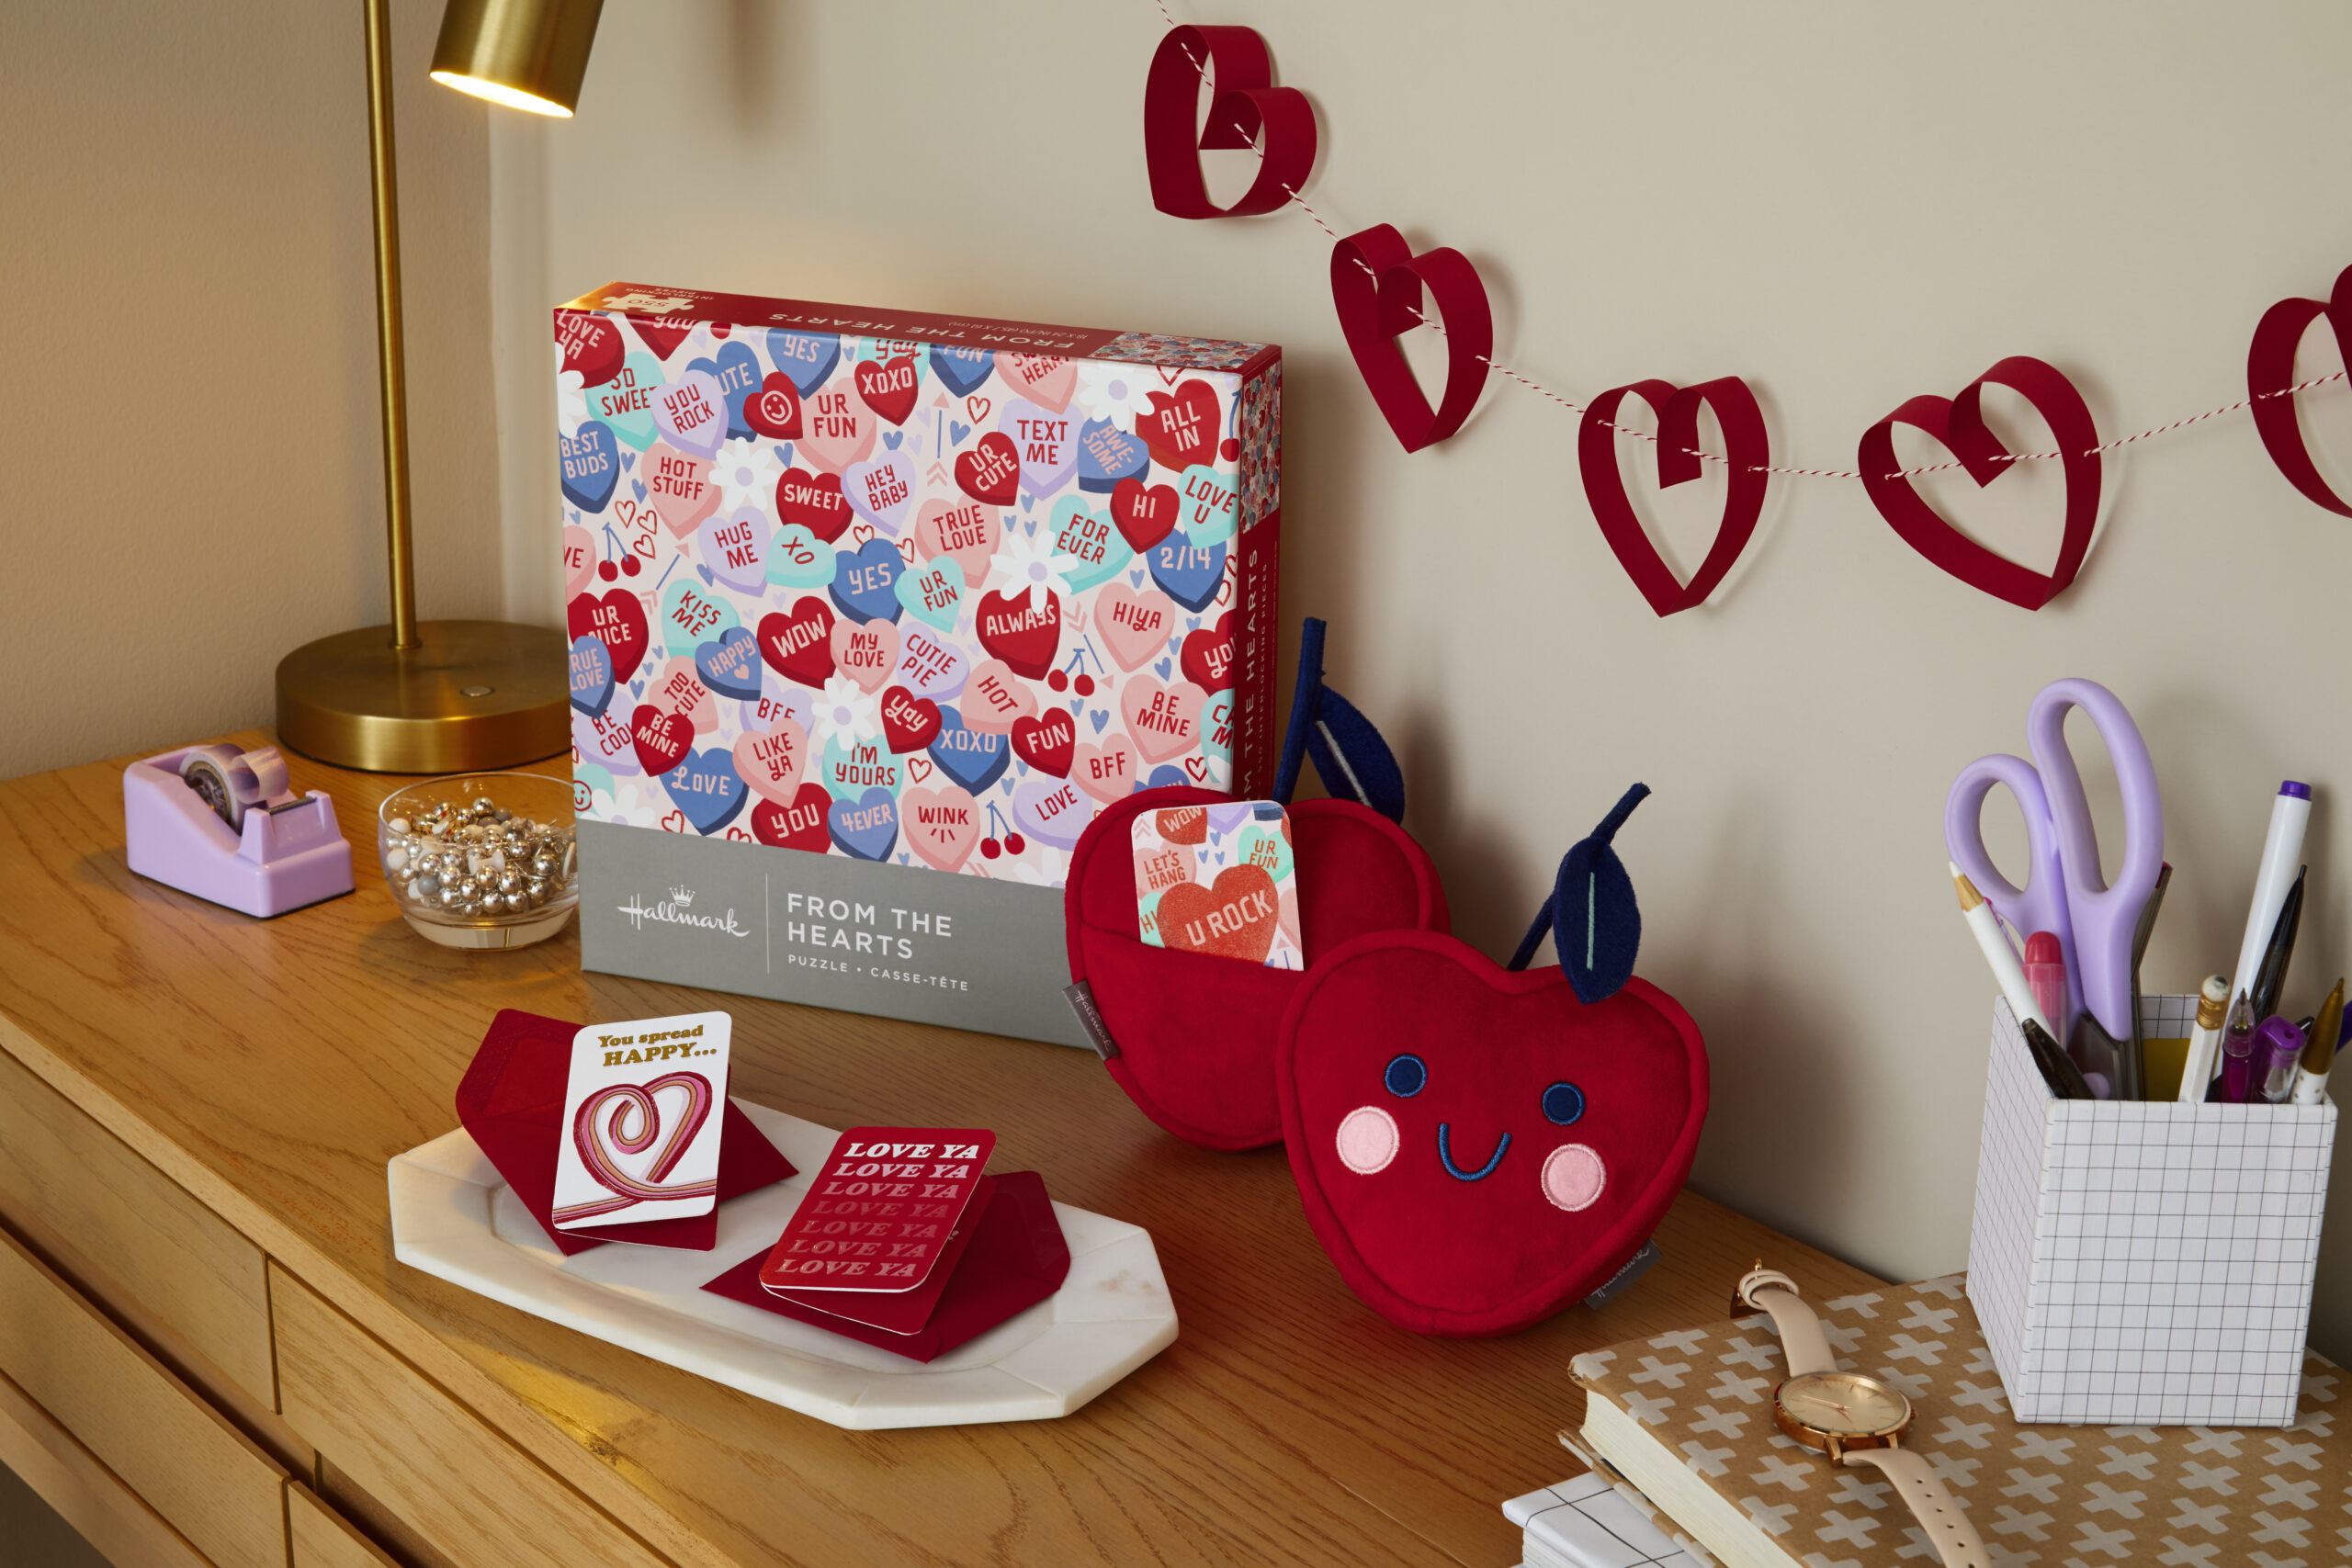 Hallmark Valentine's Day Gifts and Cards